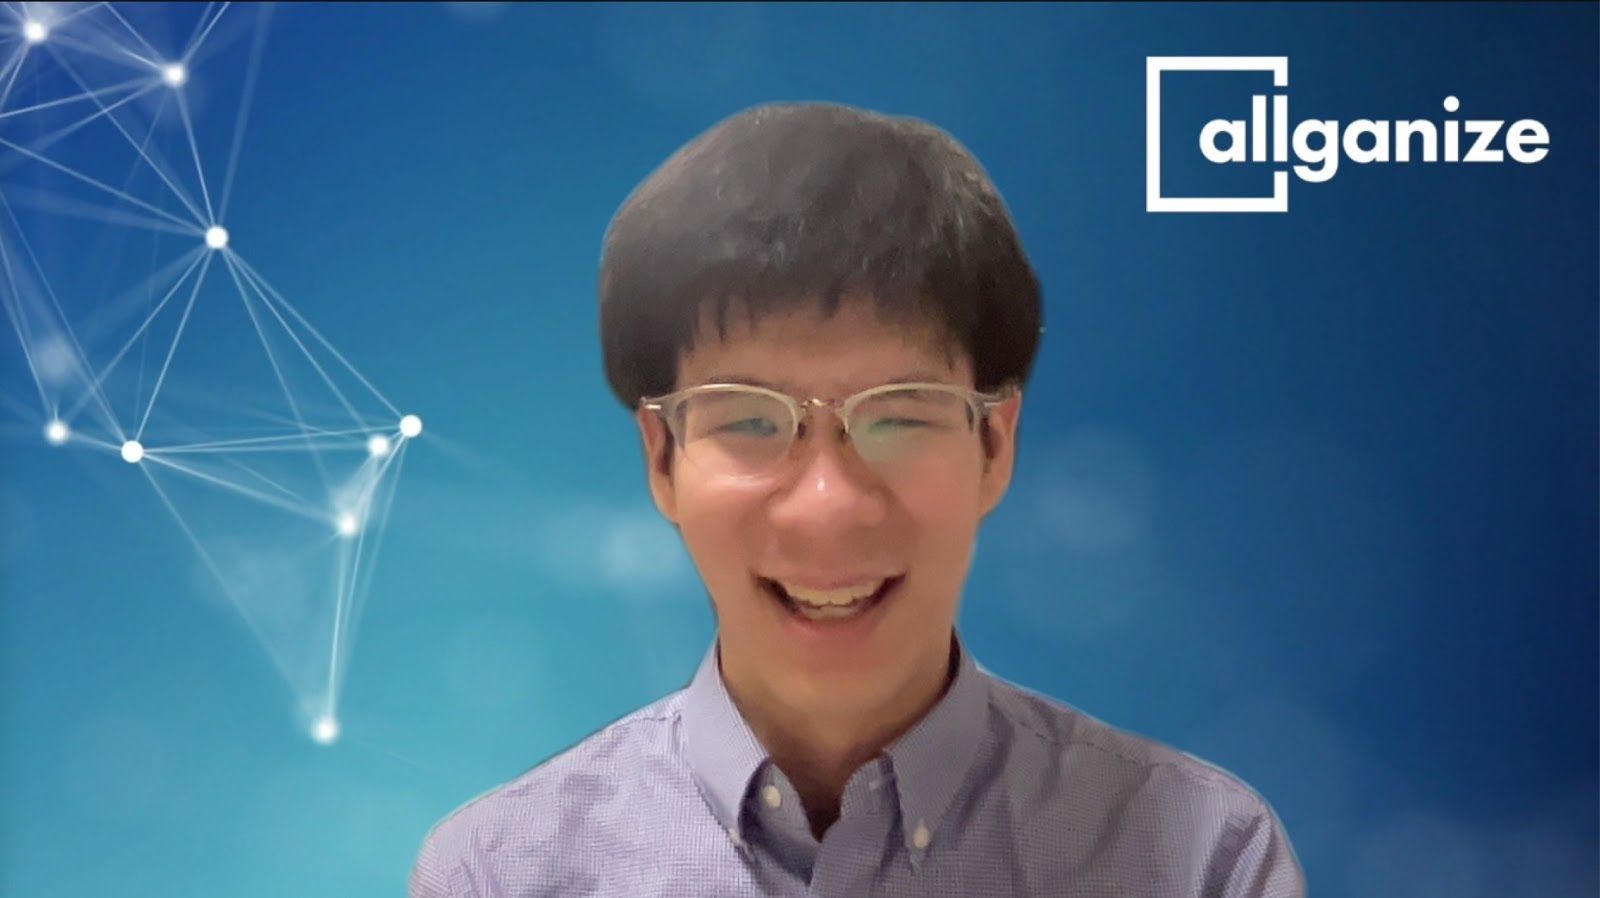 Employee Spotlight: Naoki Sugimoto - Why he chose to work at Allganize with past experience working in call centers, sales for drones, and consulting for AI